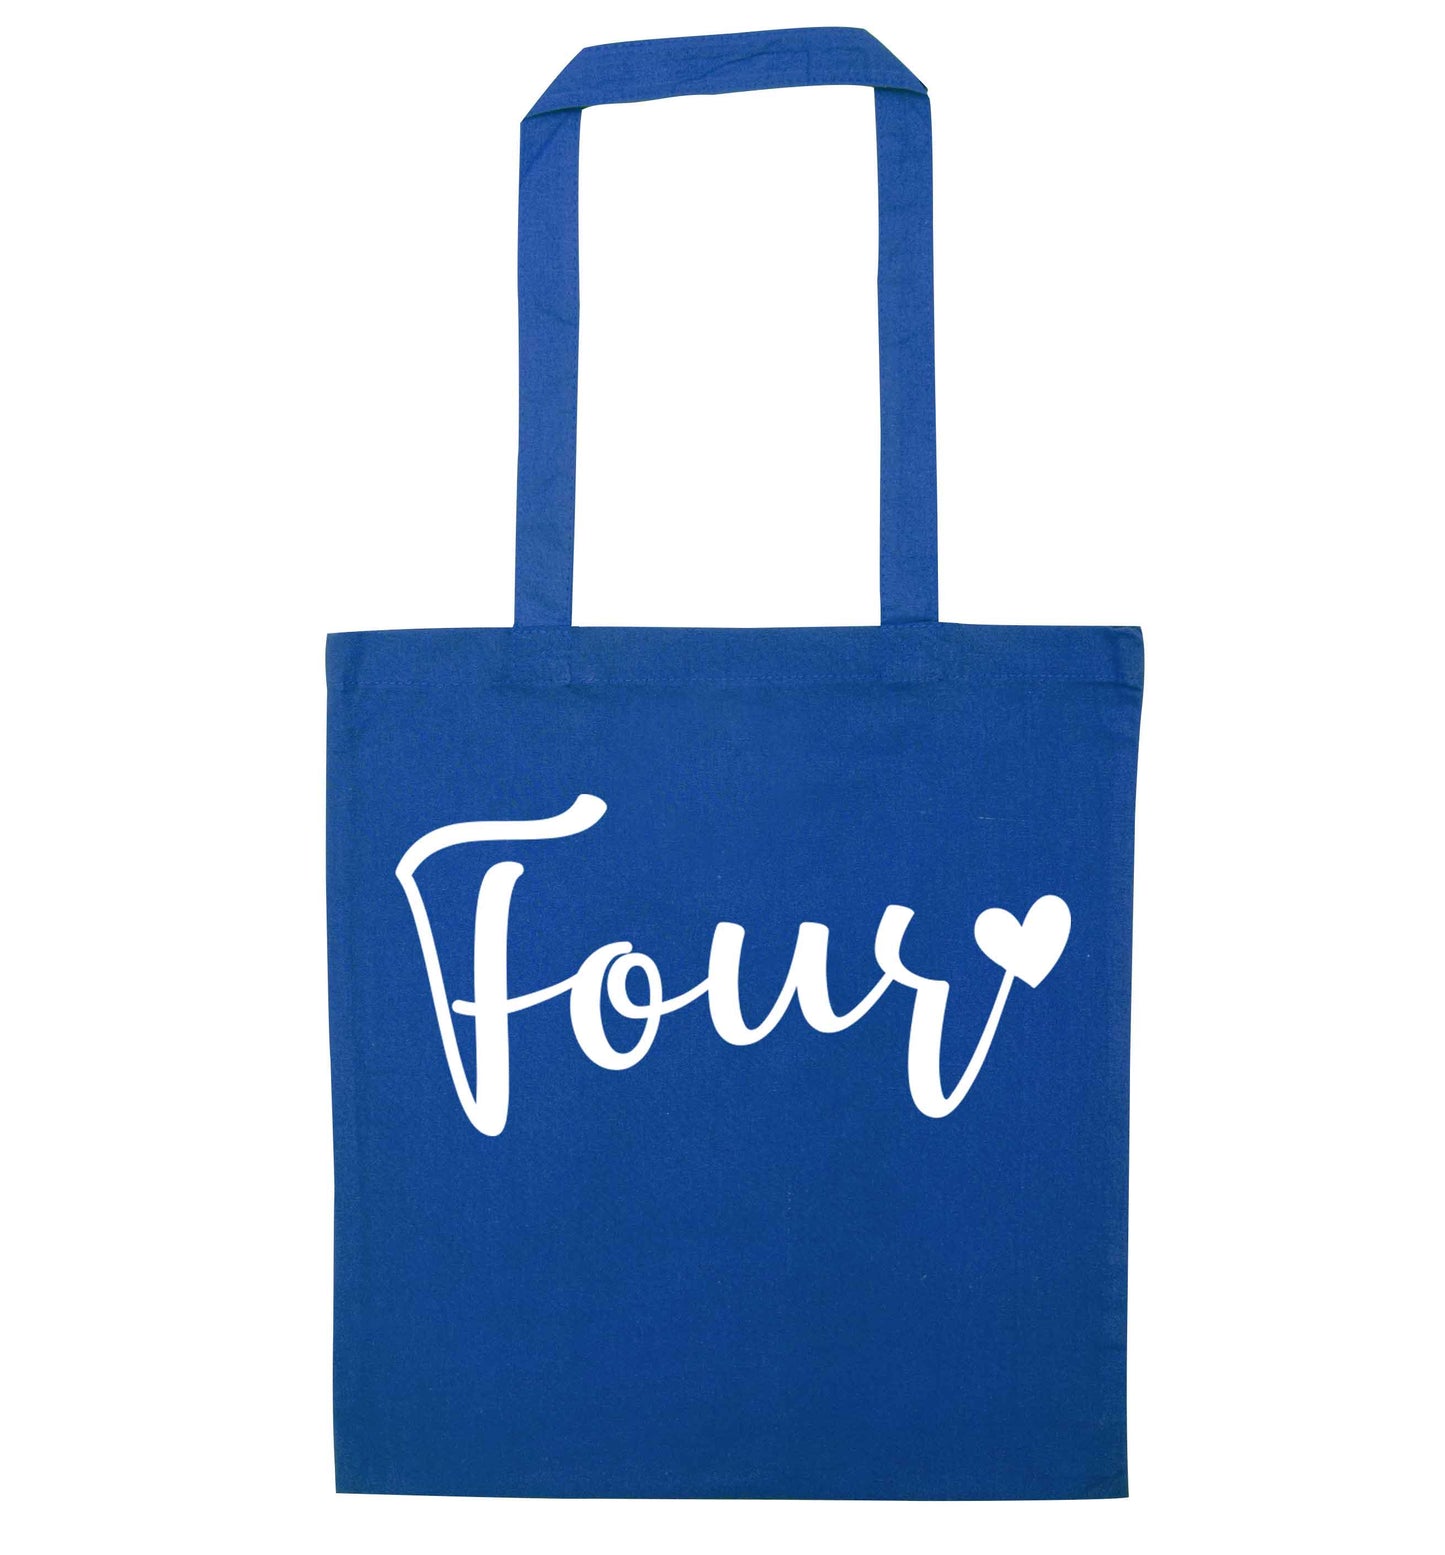 Four and heart blue tote bag